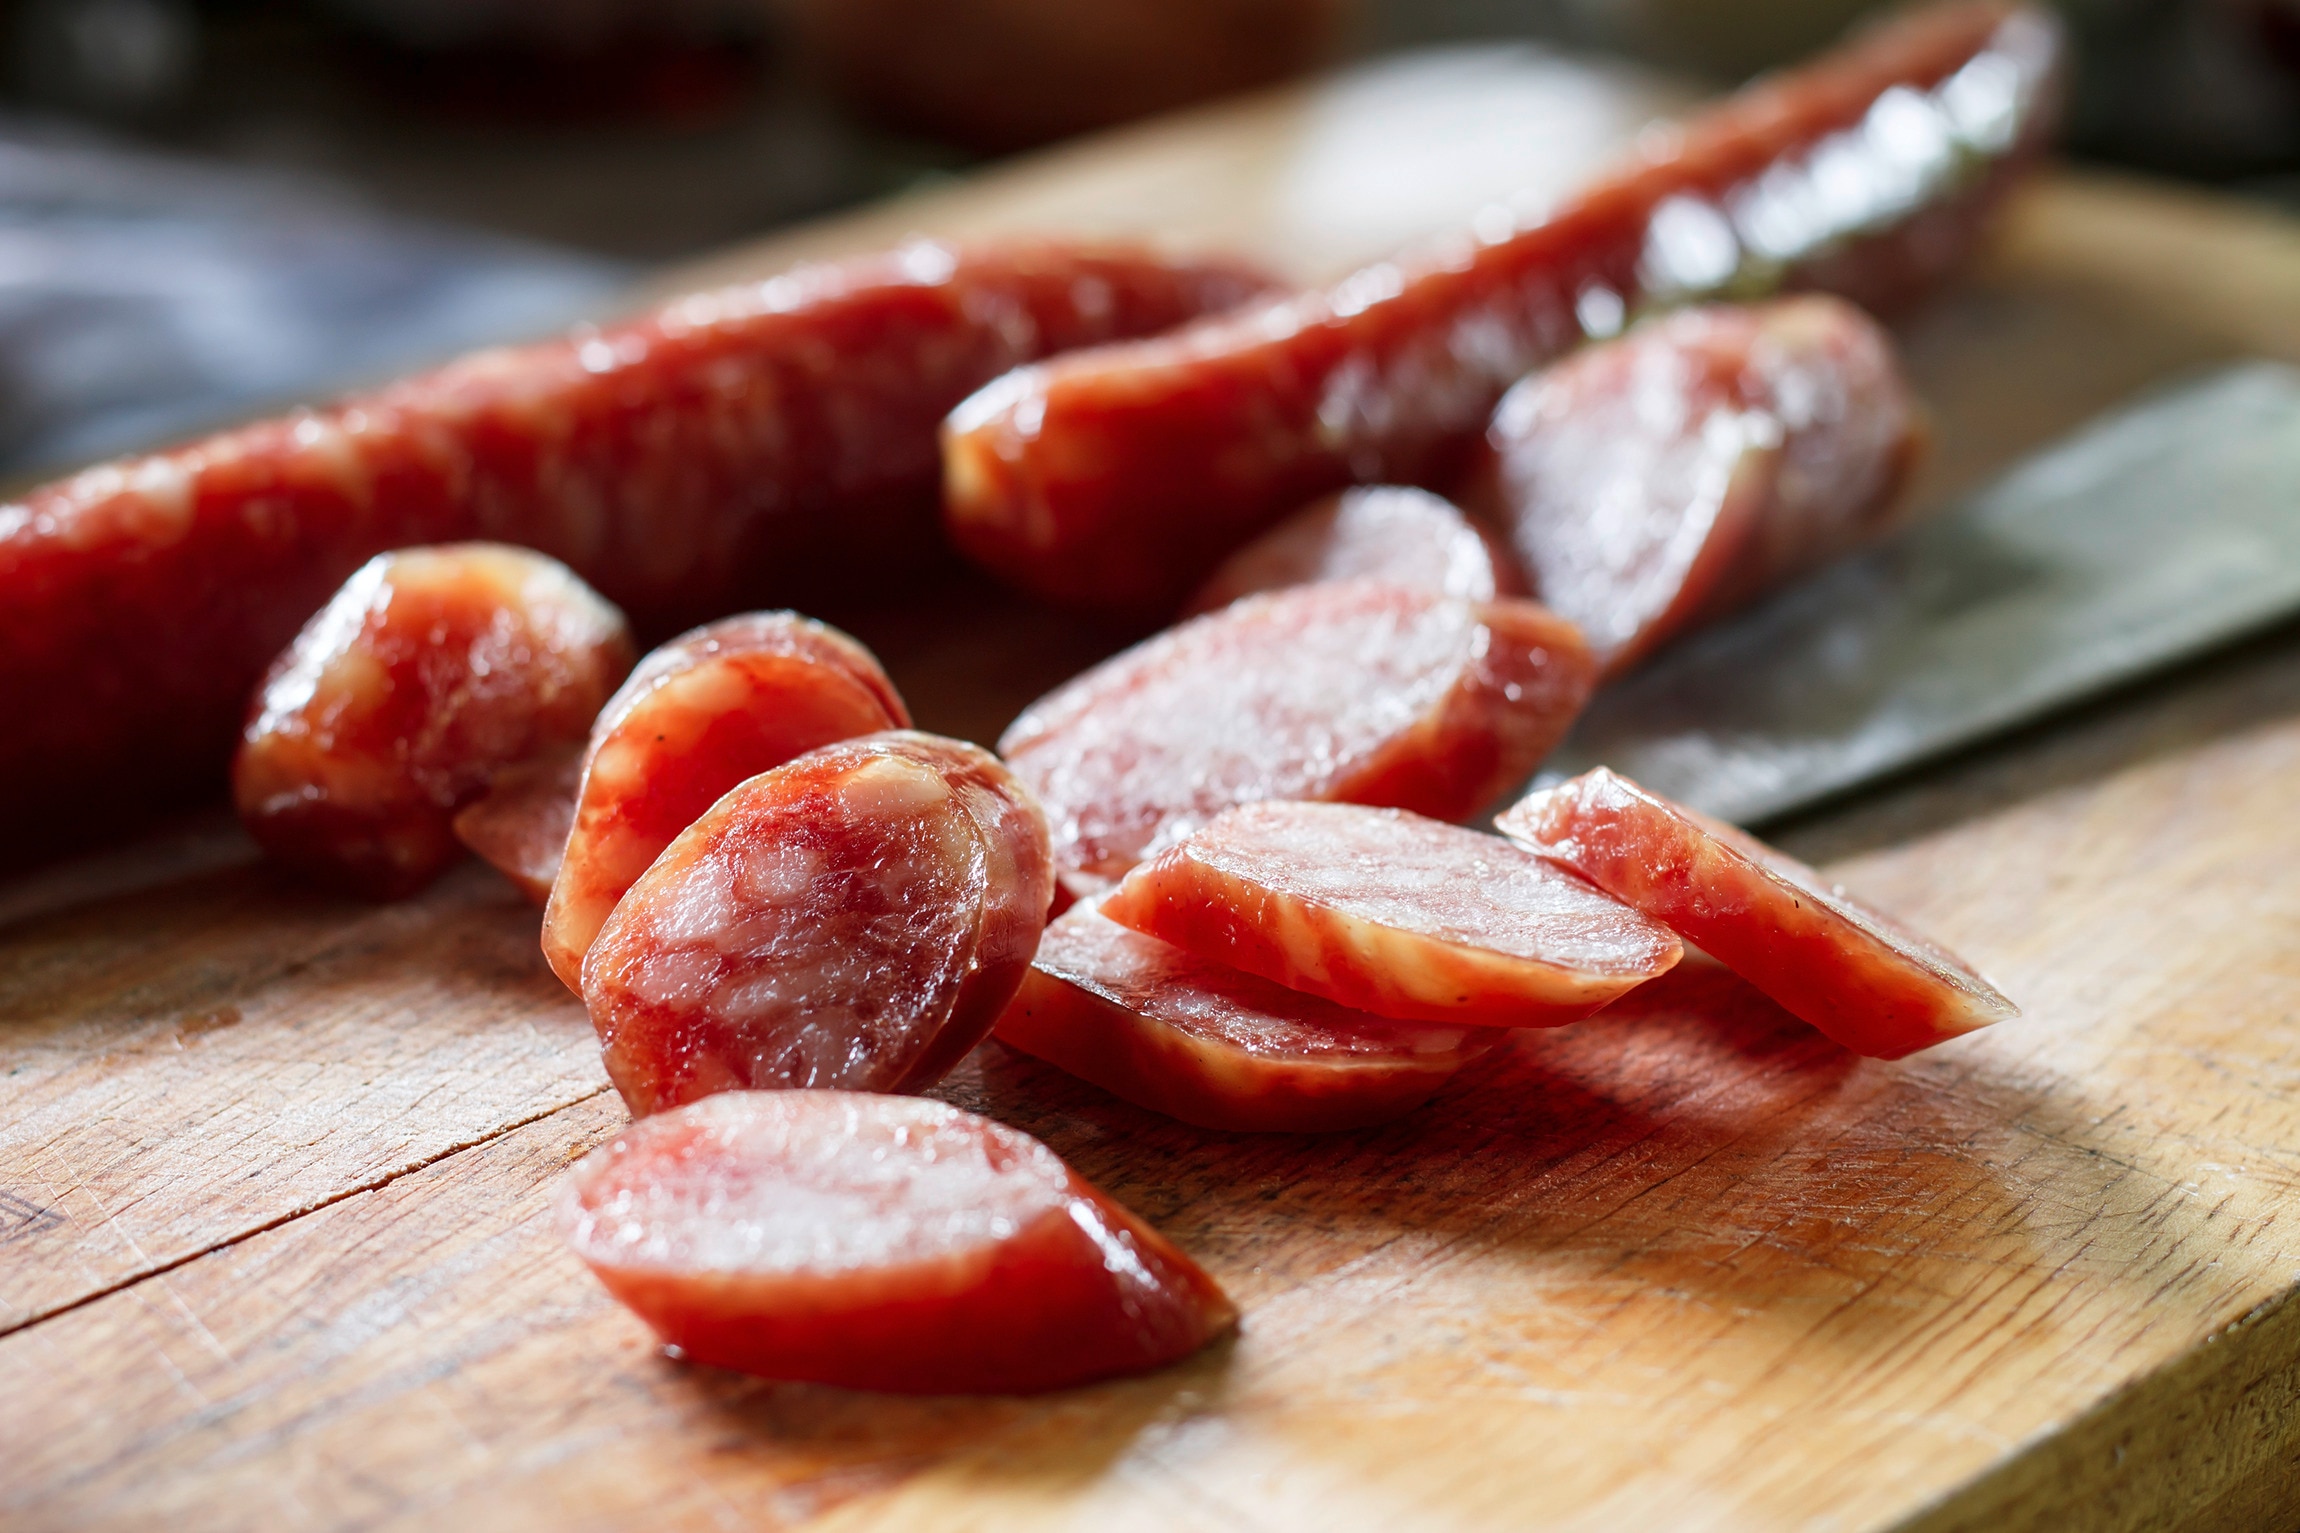 Slices of Chinese sausage on a wooden chopping board